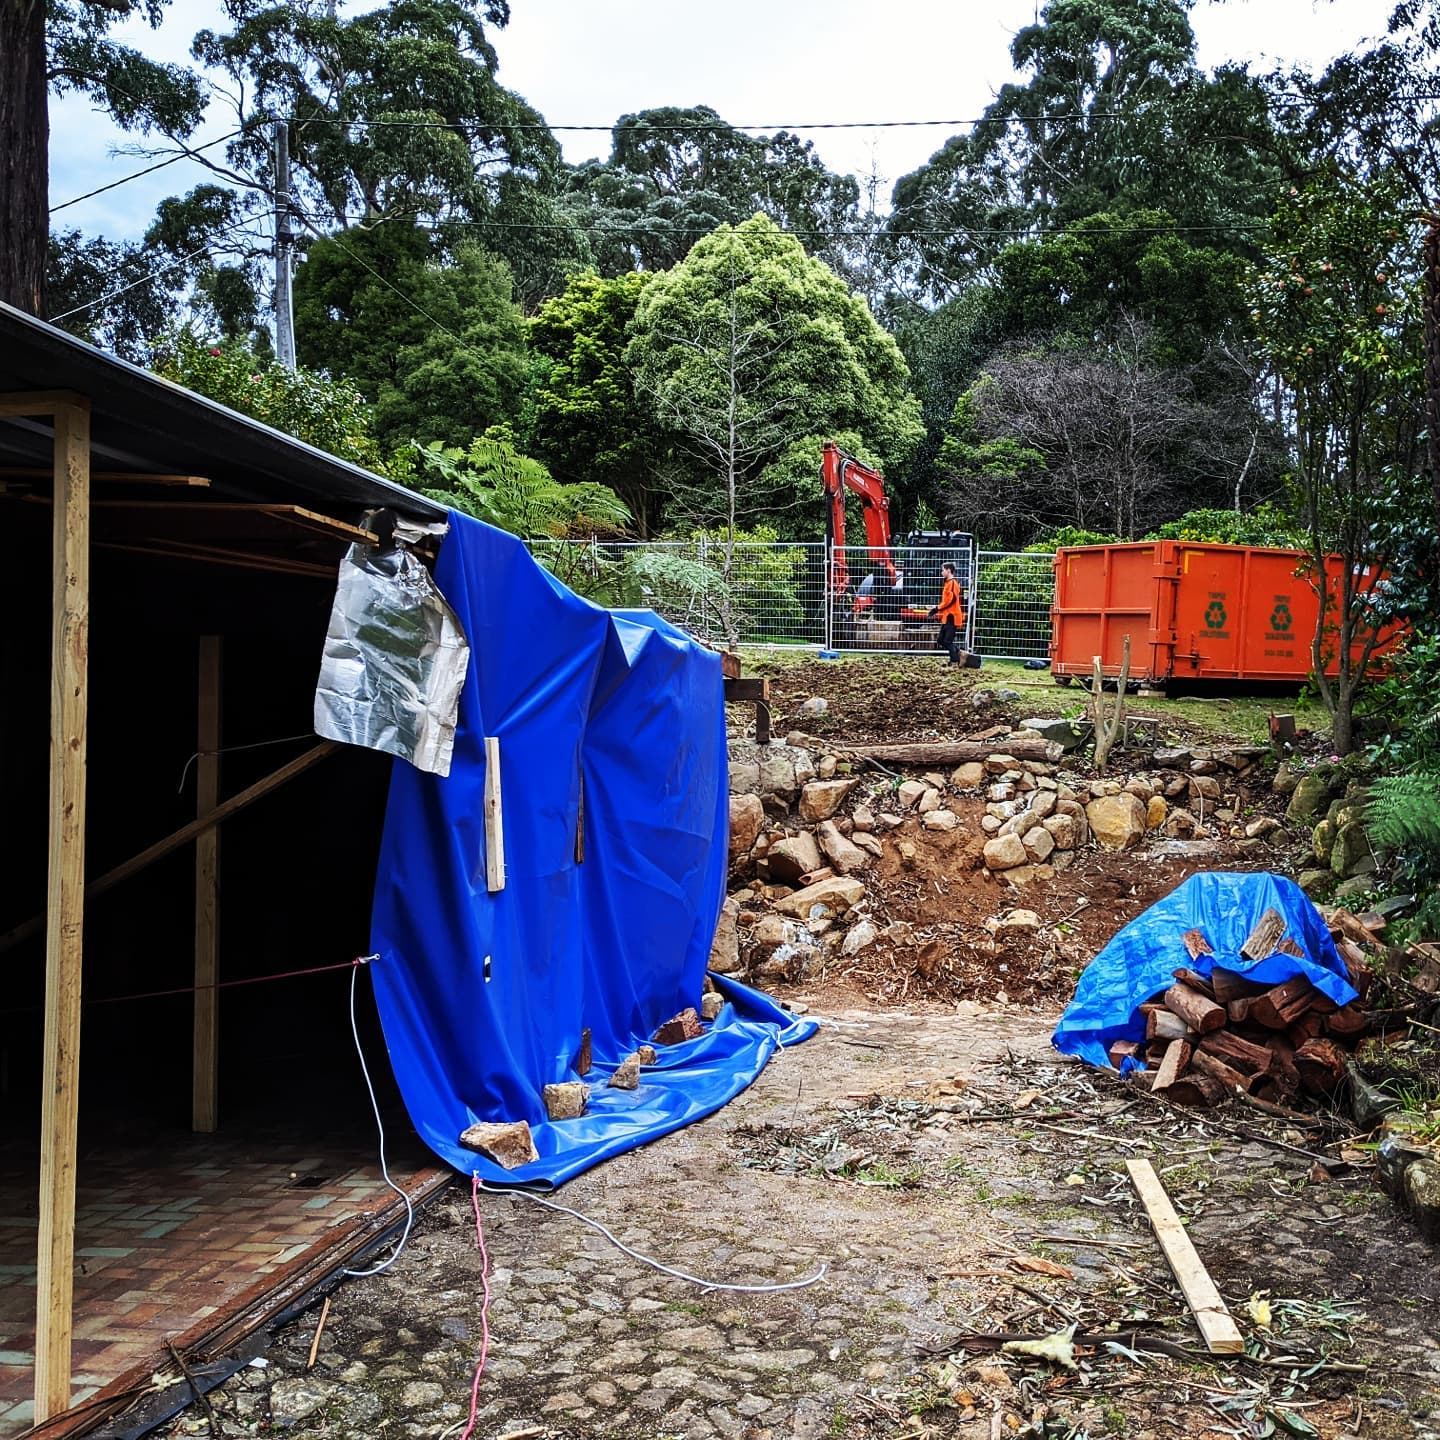 Deconstructors Demolition Victoria. uick clean up before the rain started! The boys did a great job getting the debris out, framing up a temporary roof and tarping the undamaged section before a decent storm hit. #demolition #building #construction #restoration #storm